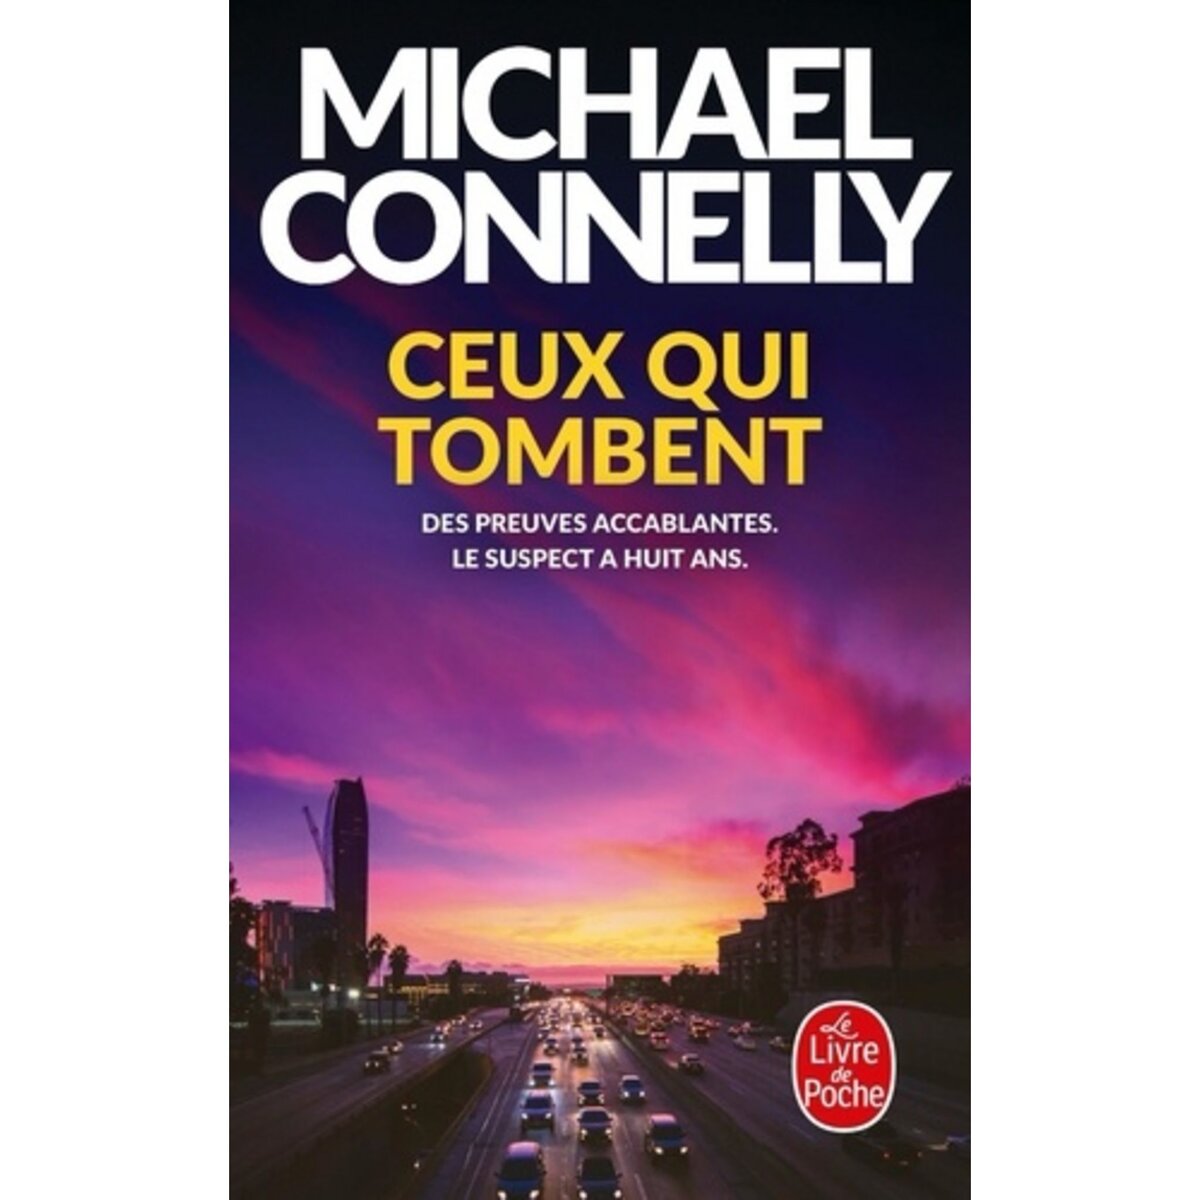  CEUX QUI TOMBENT, Connelly Michael